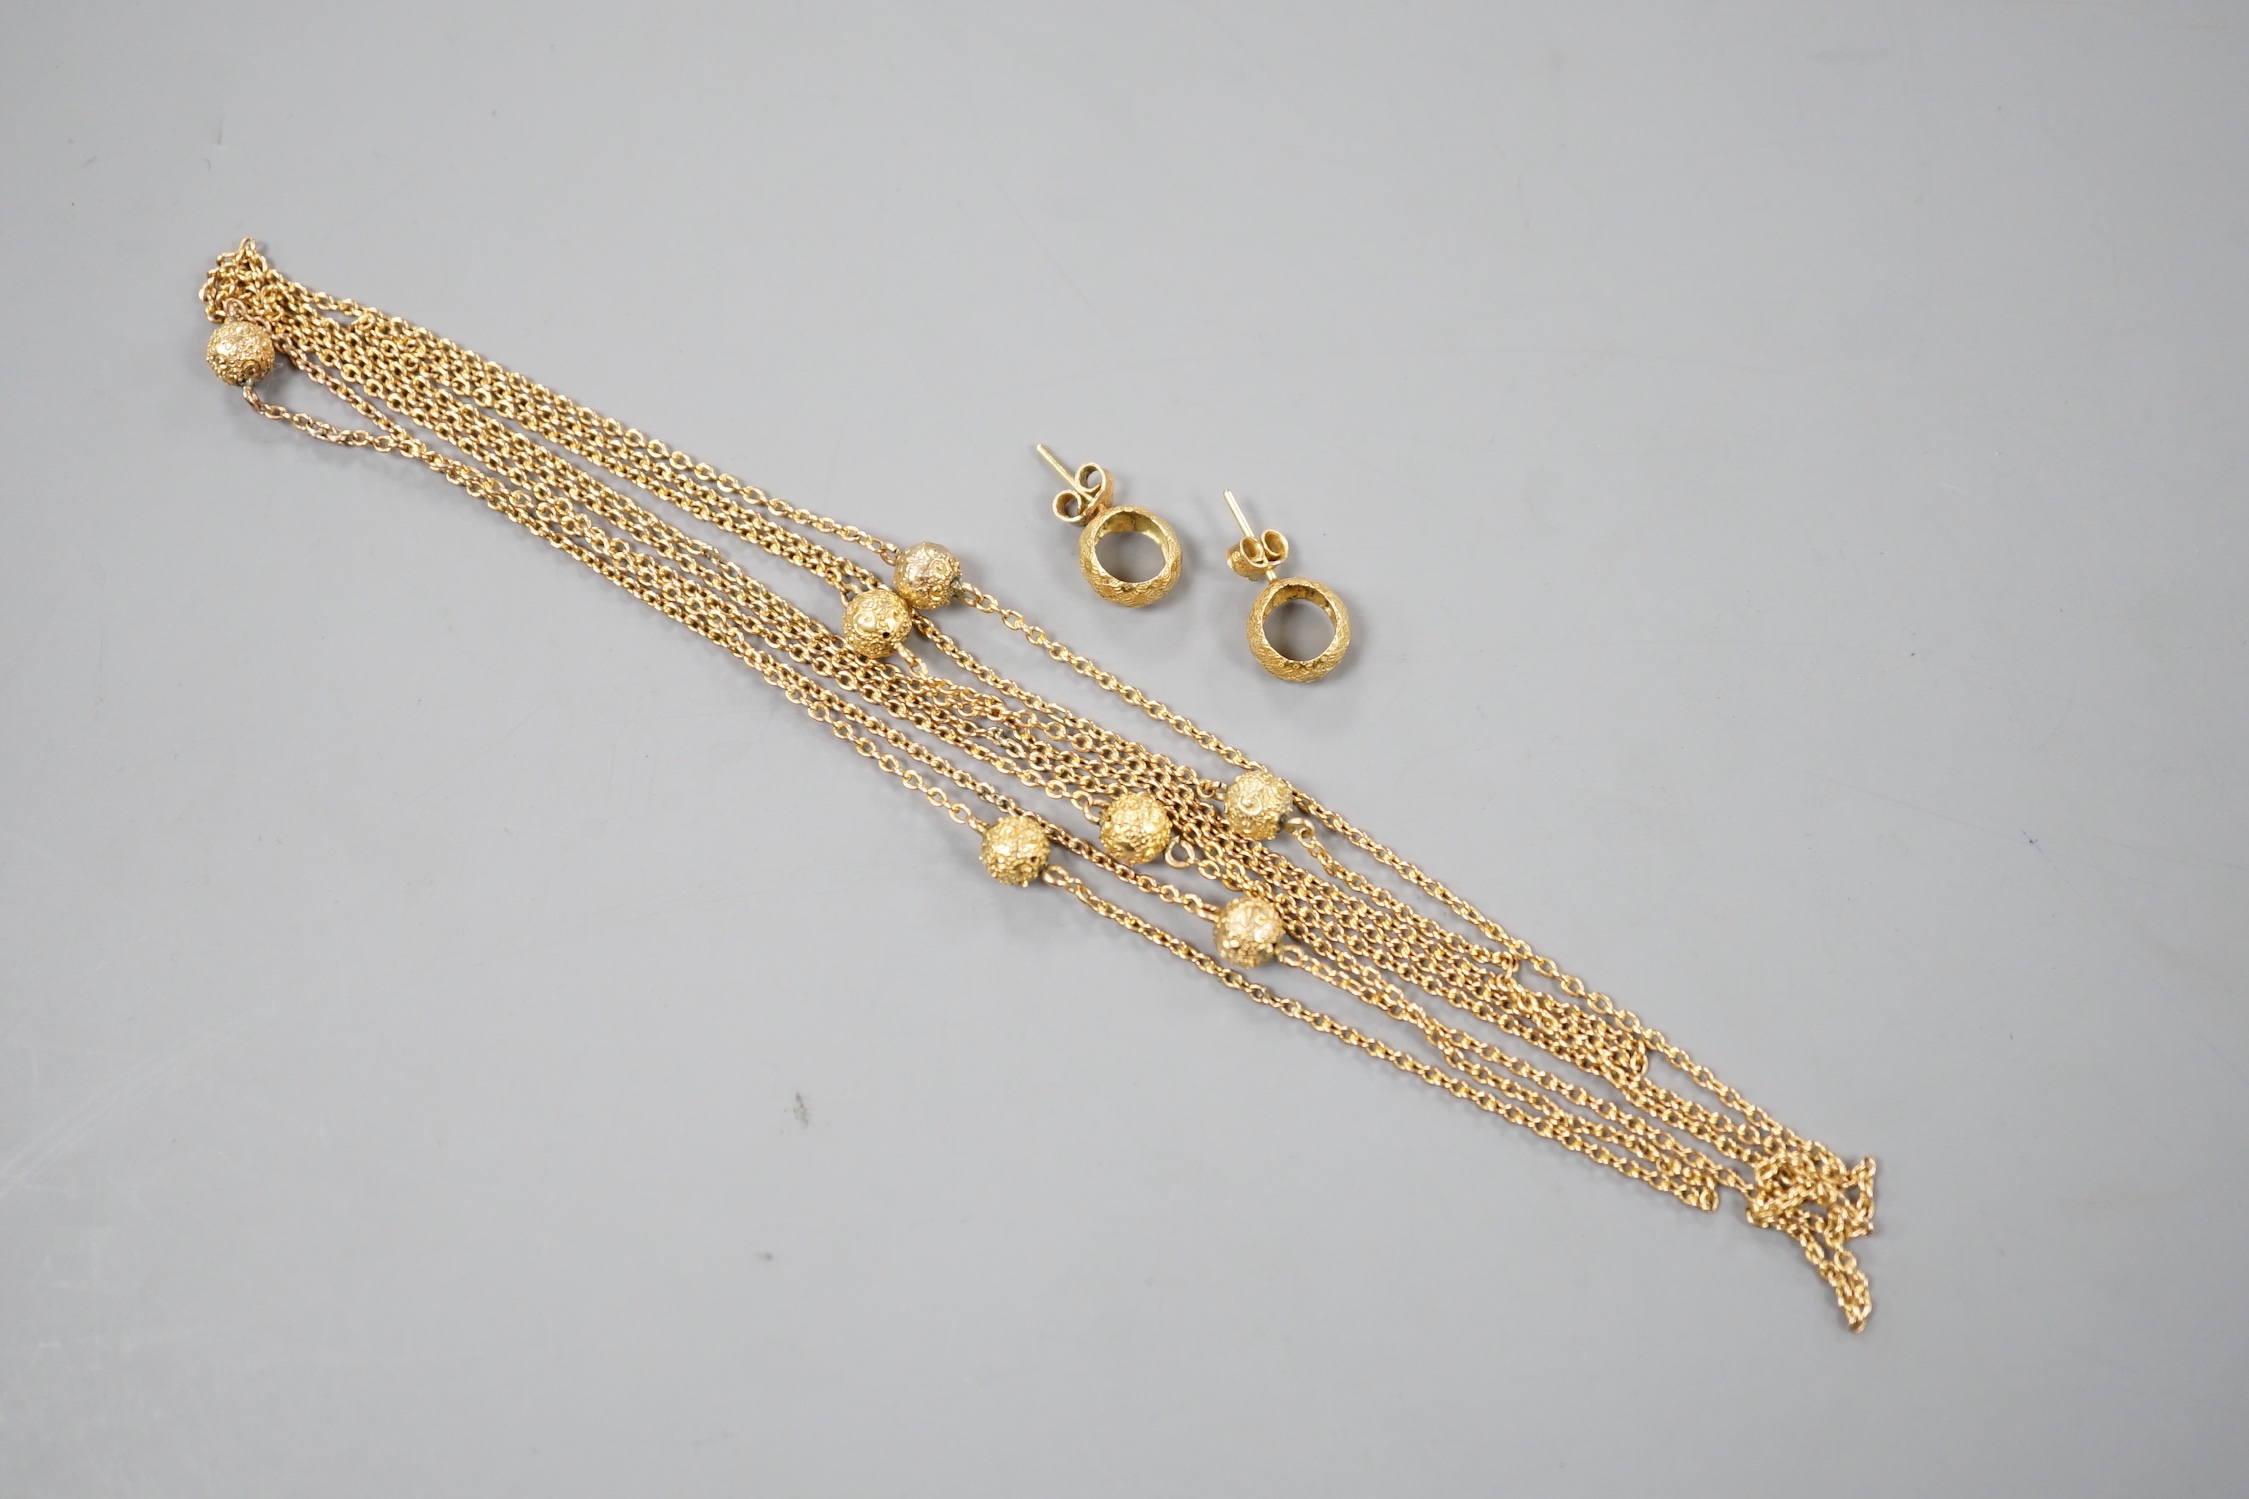 A 9ct guard chain with spherical spacers and a pair of 9k earrings, 11.7 grams.